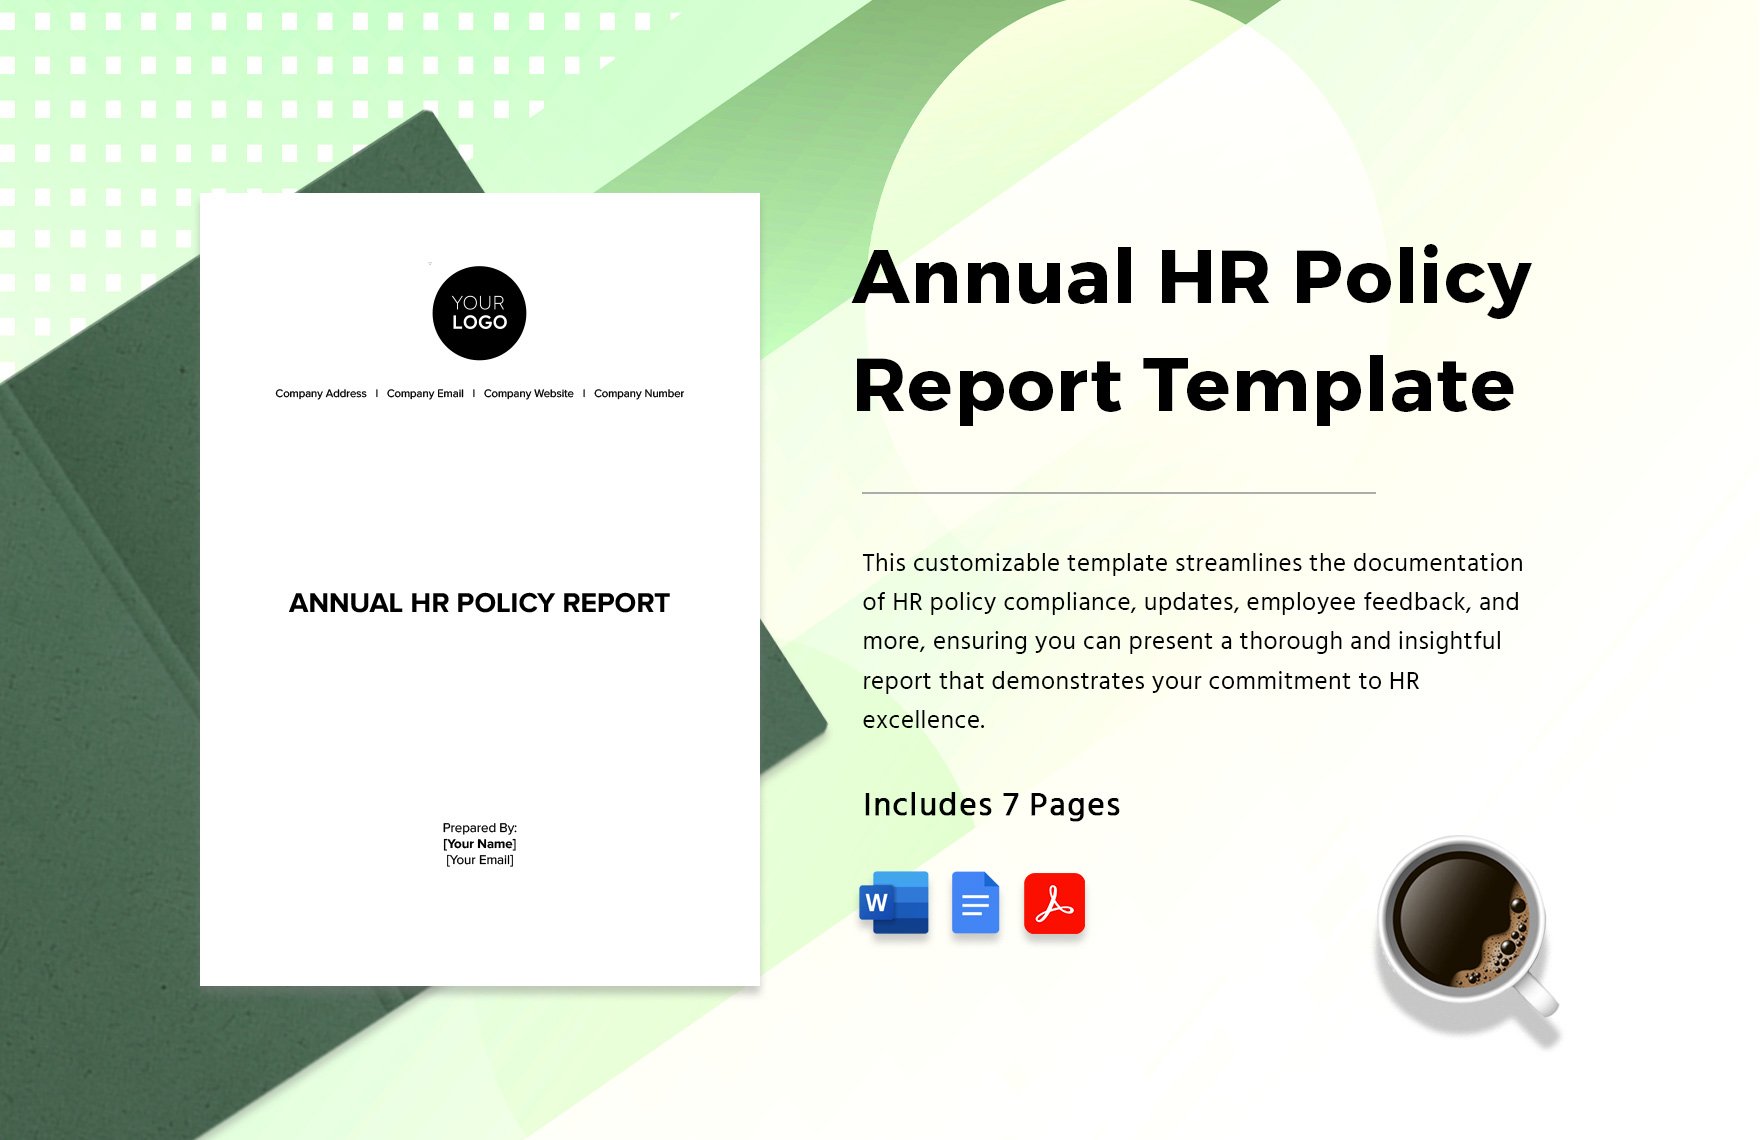 Annual HR Policy Report Template